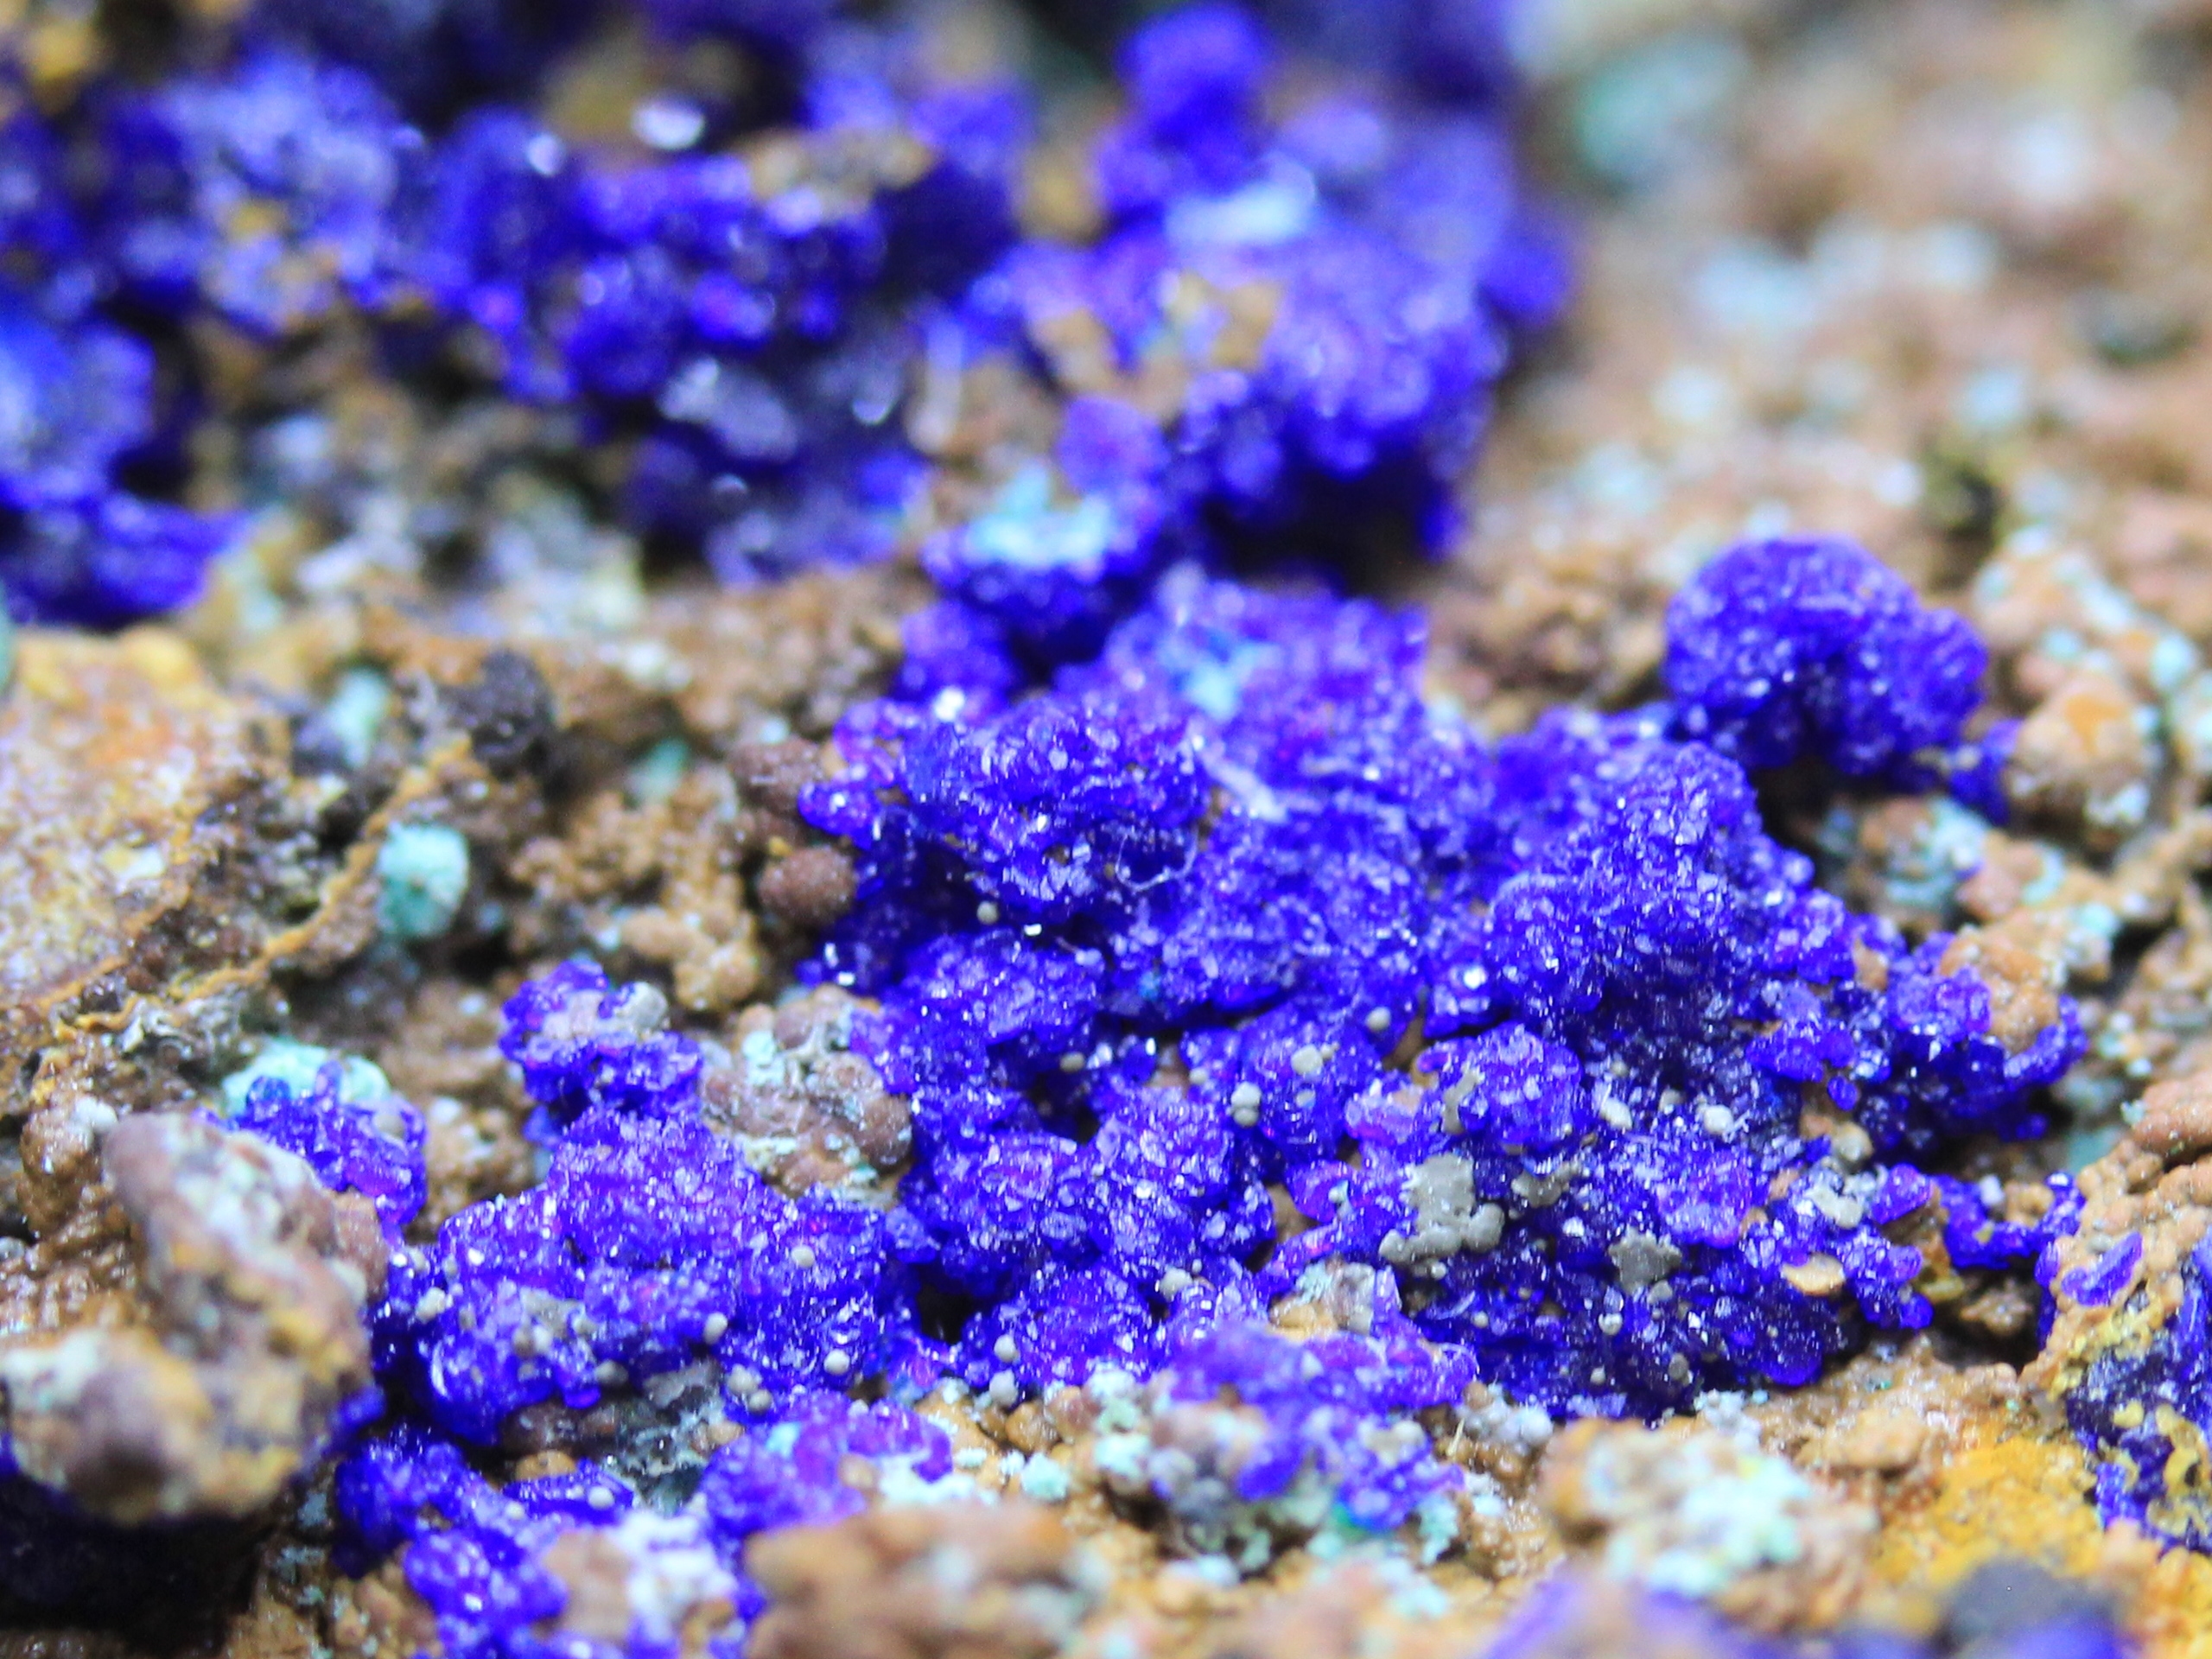 Azurite, malachite, and others (microcrystals Zálesíite ?)